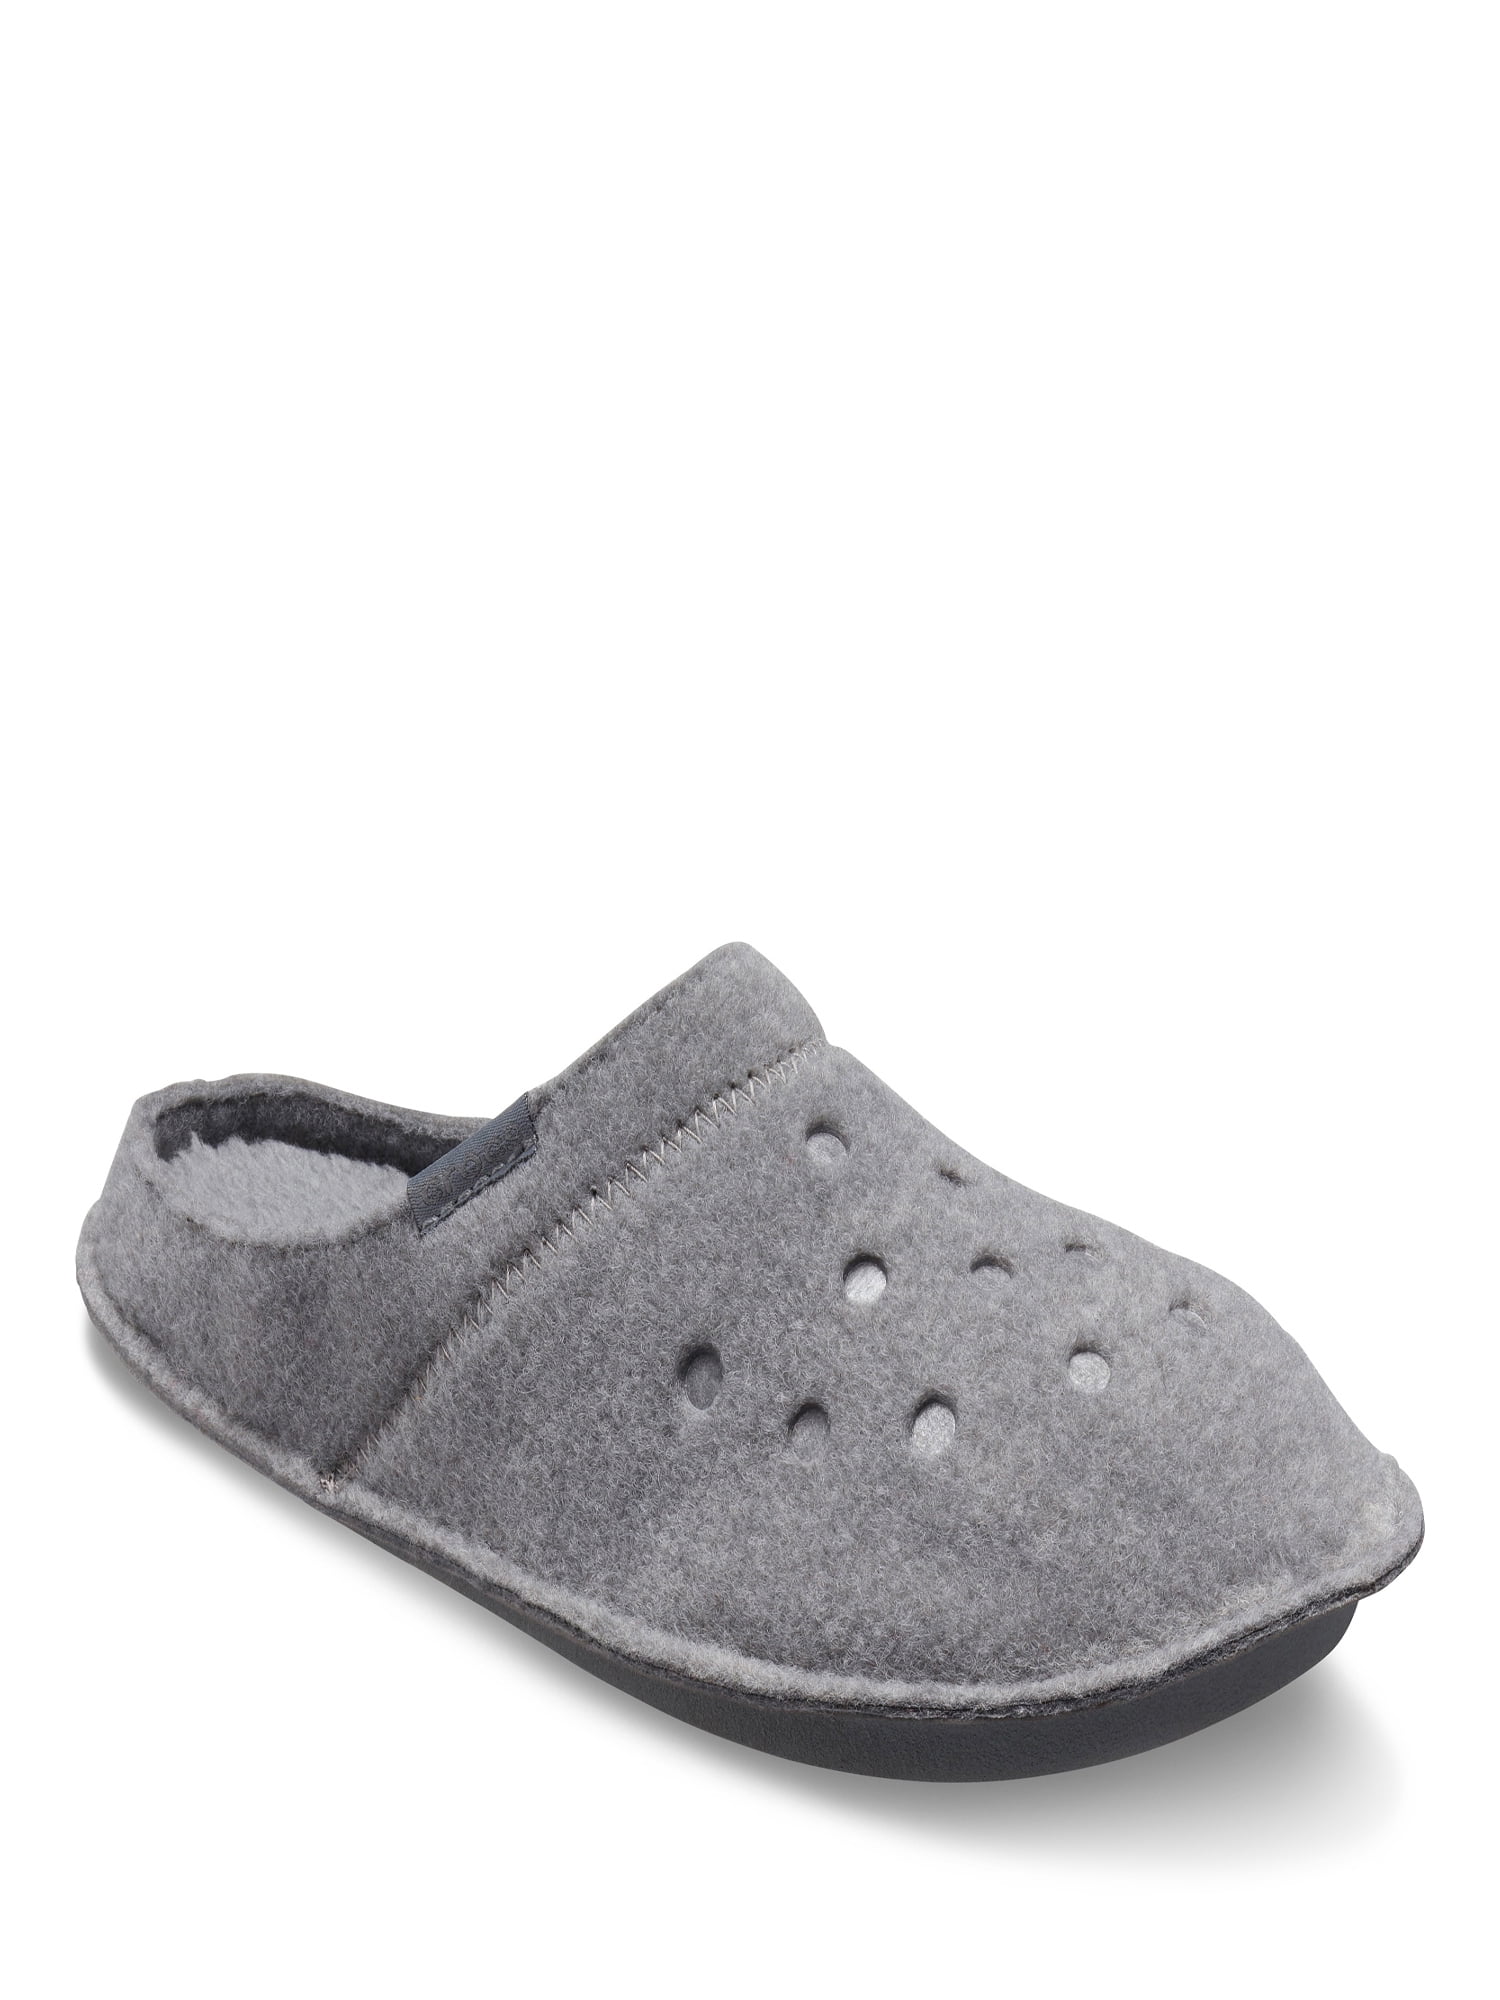 Classic Cozzzy Slipper | Classic, Fur and shearling, Crocs